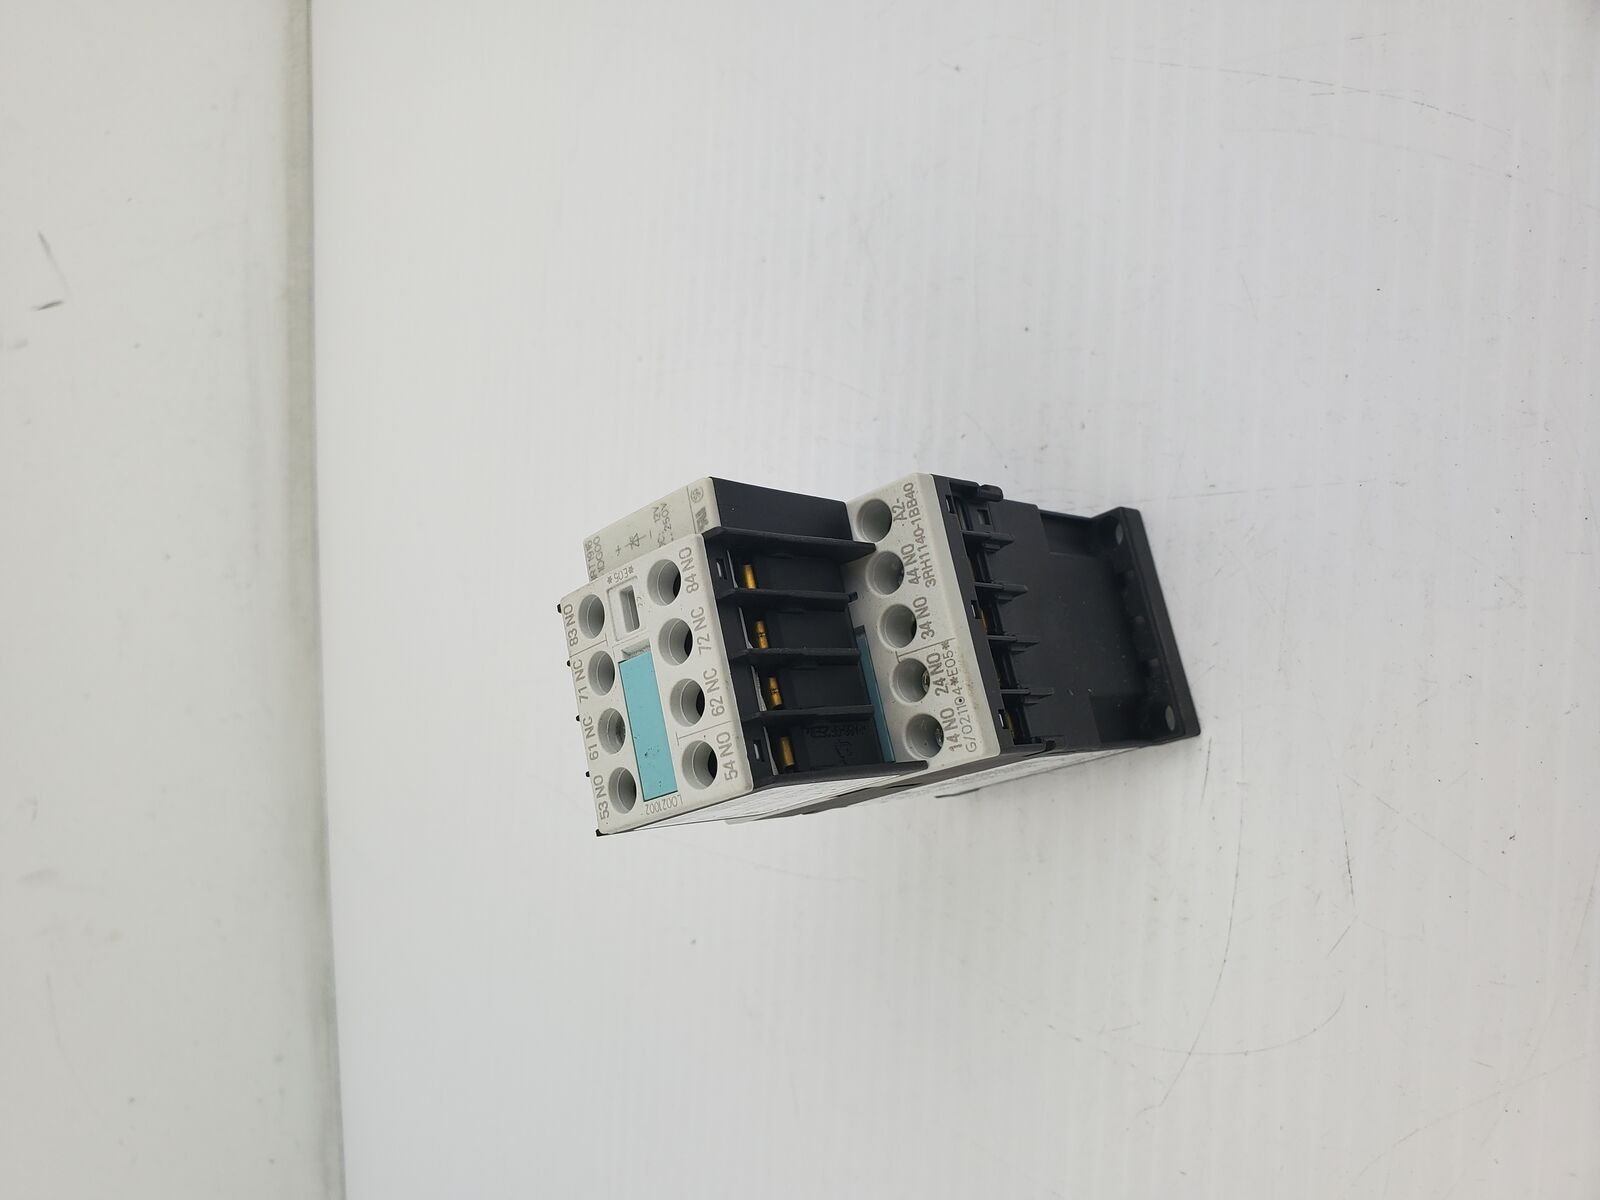 Siemens 3RH1140-1BB40 Contactor With 3RH1911-1FA22 Contact Block